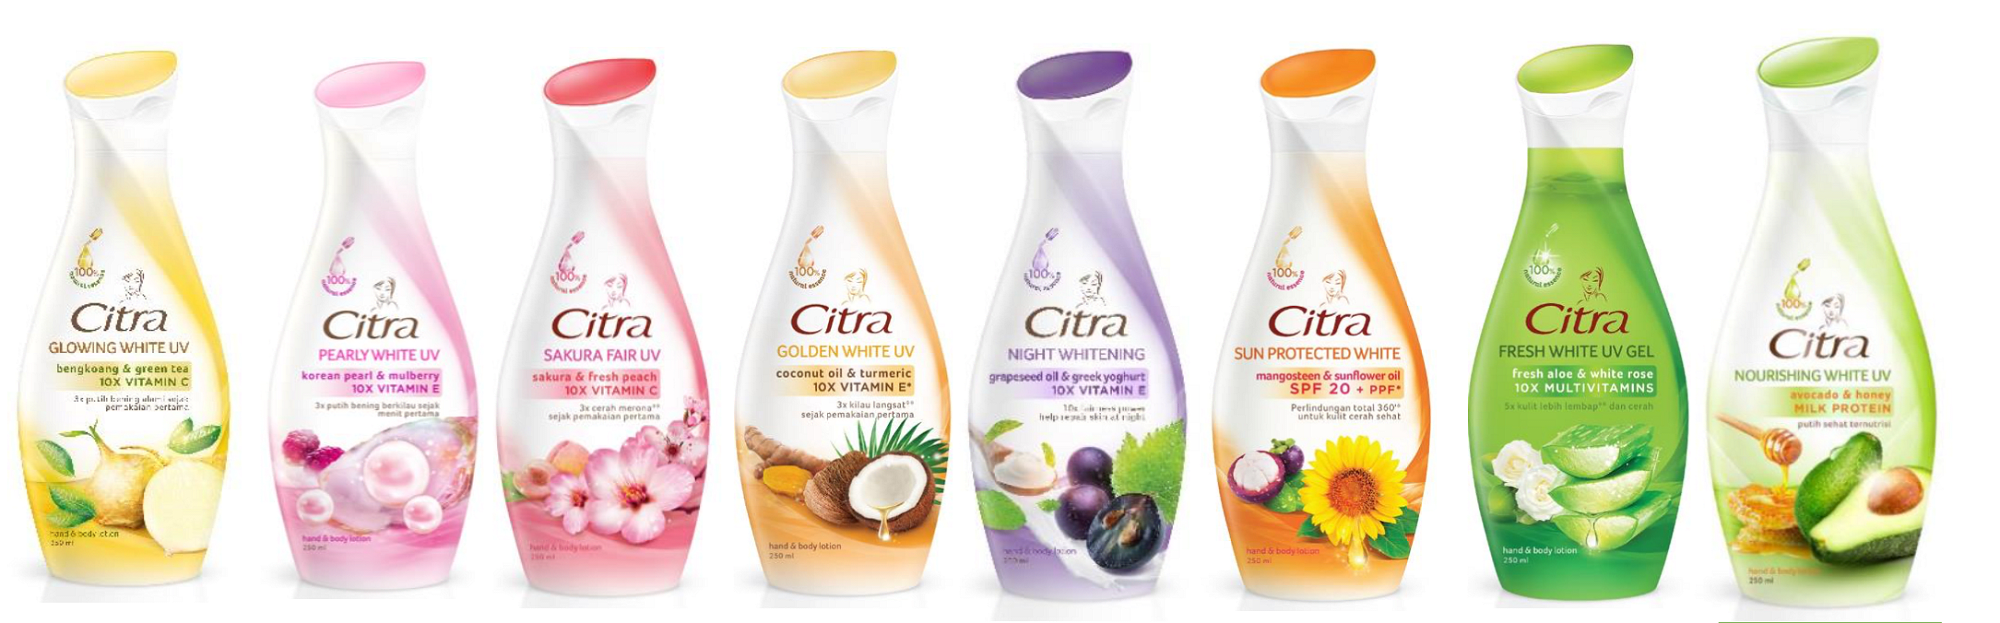 Citra_Hand_Body_Lotion_Indonesia.png